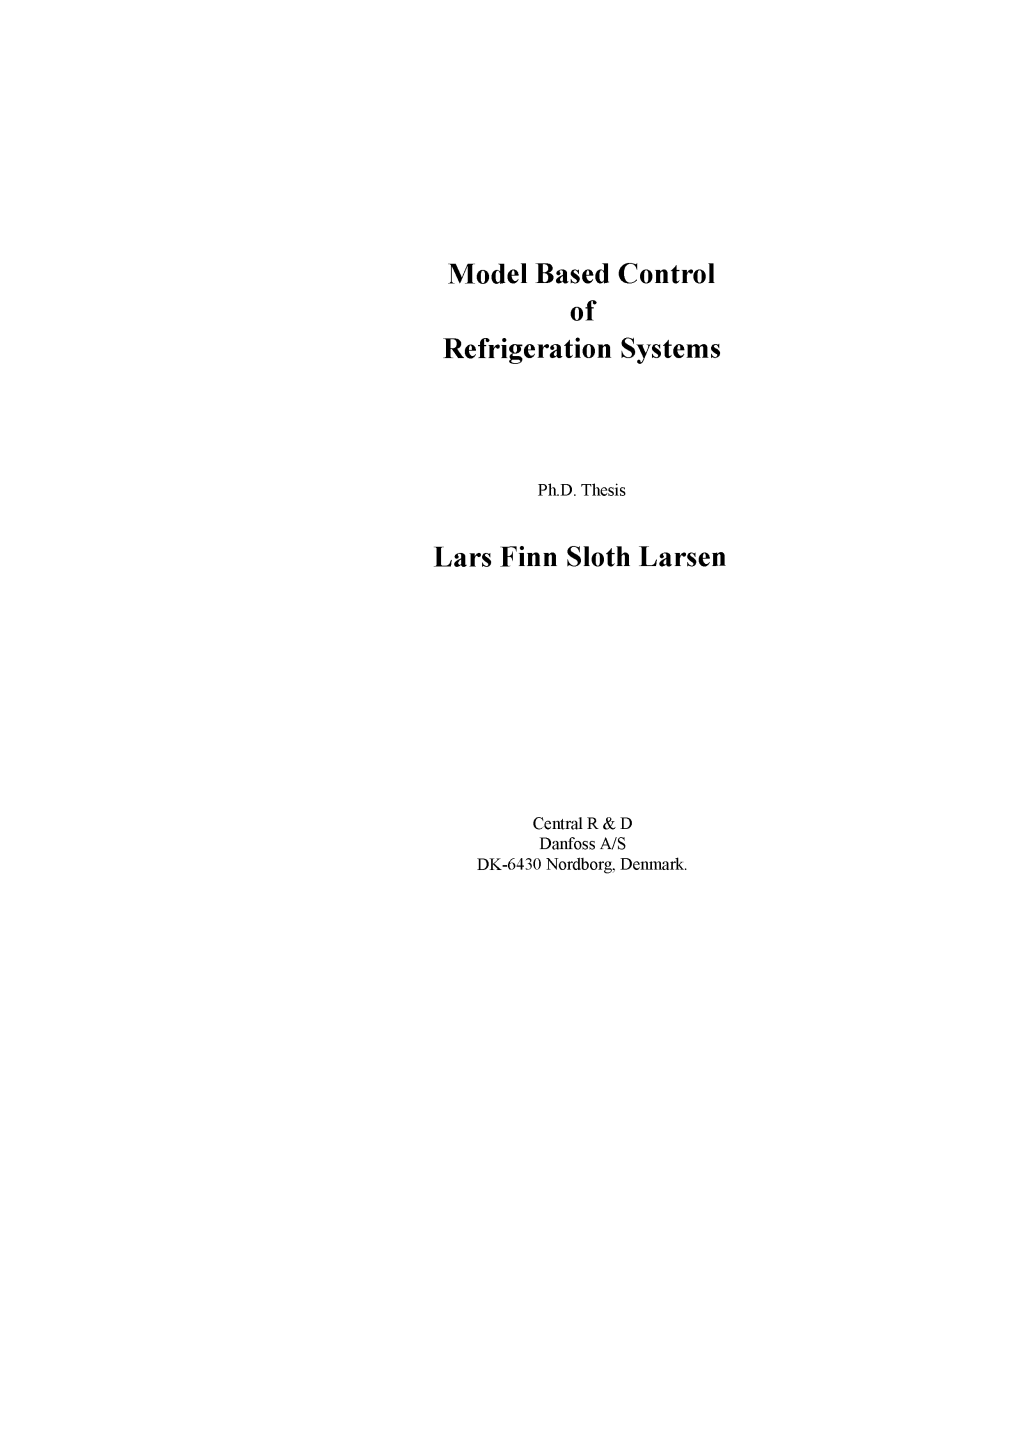 Model Based Control of Refrigeration Systems